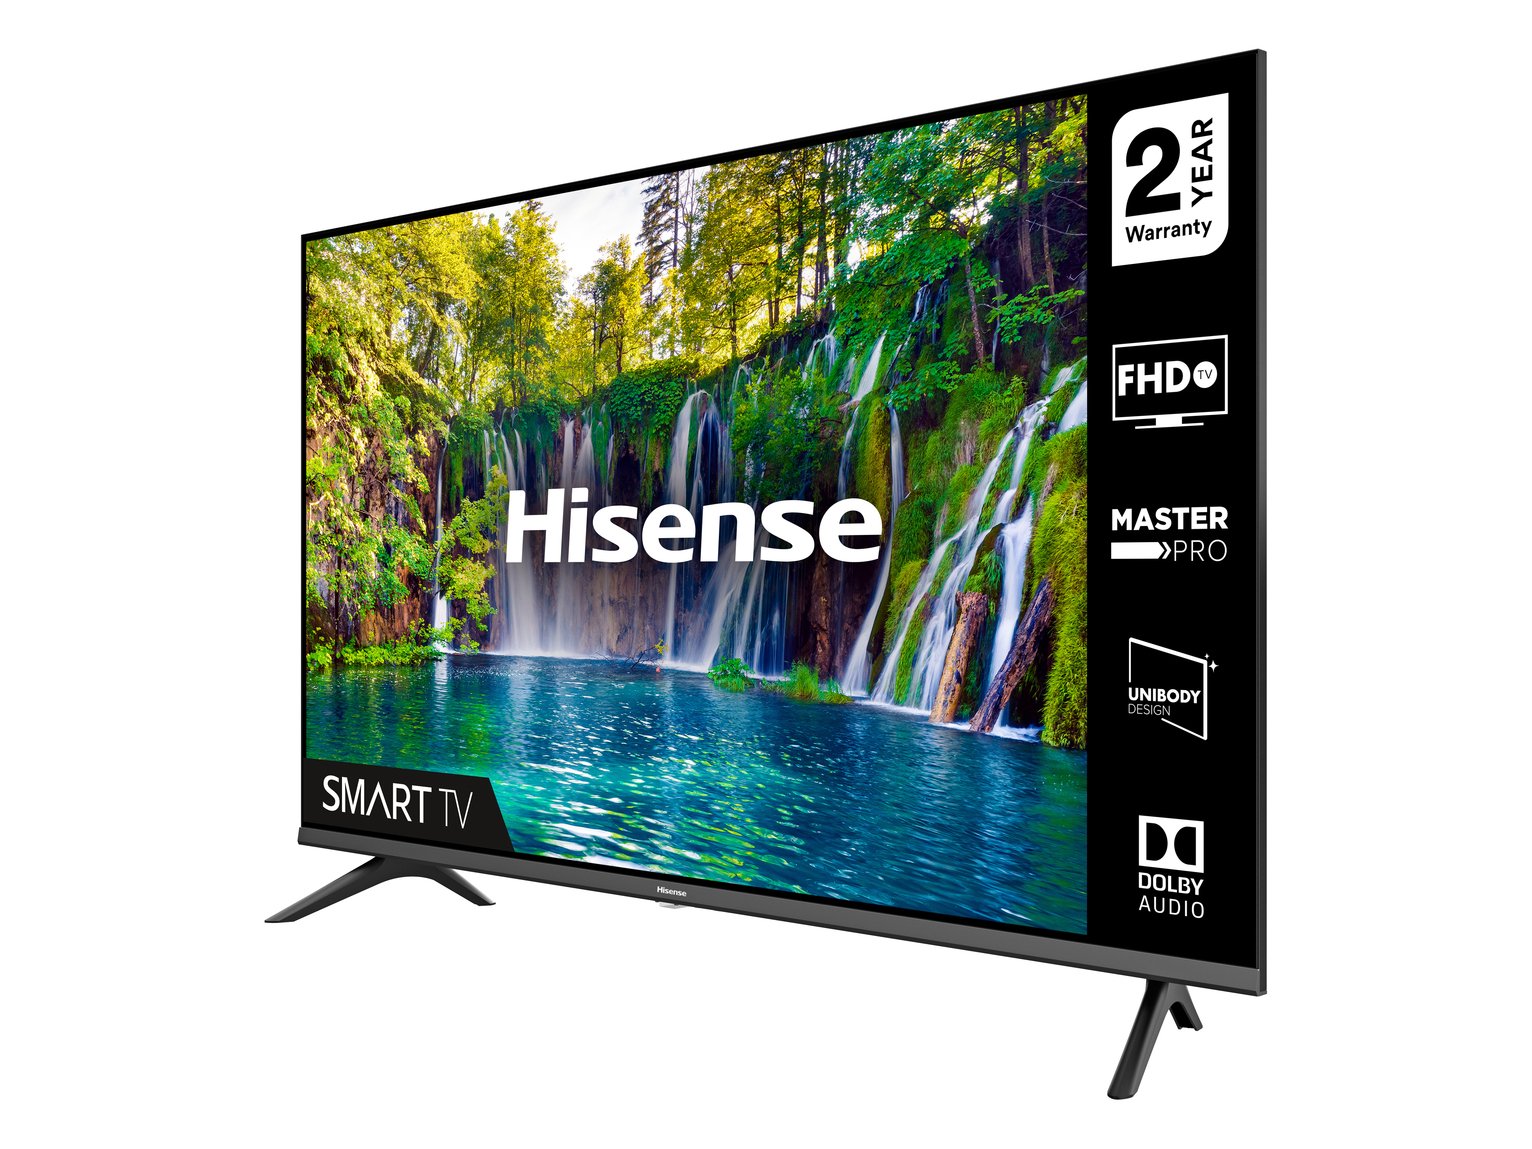 Hisense 40 Inch 40A5600FTUK Smart Full HD LED TV with HDR Review